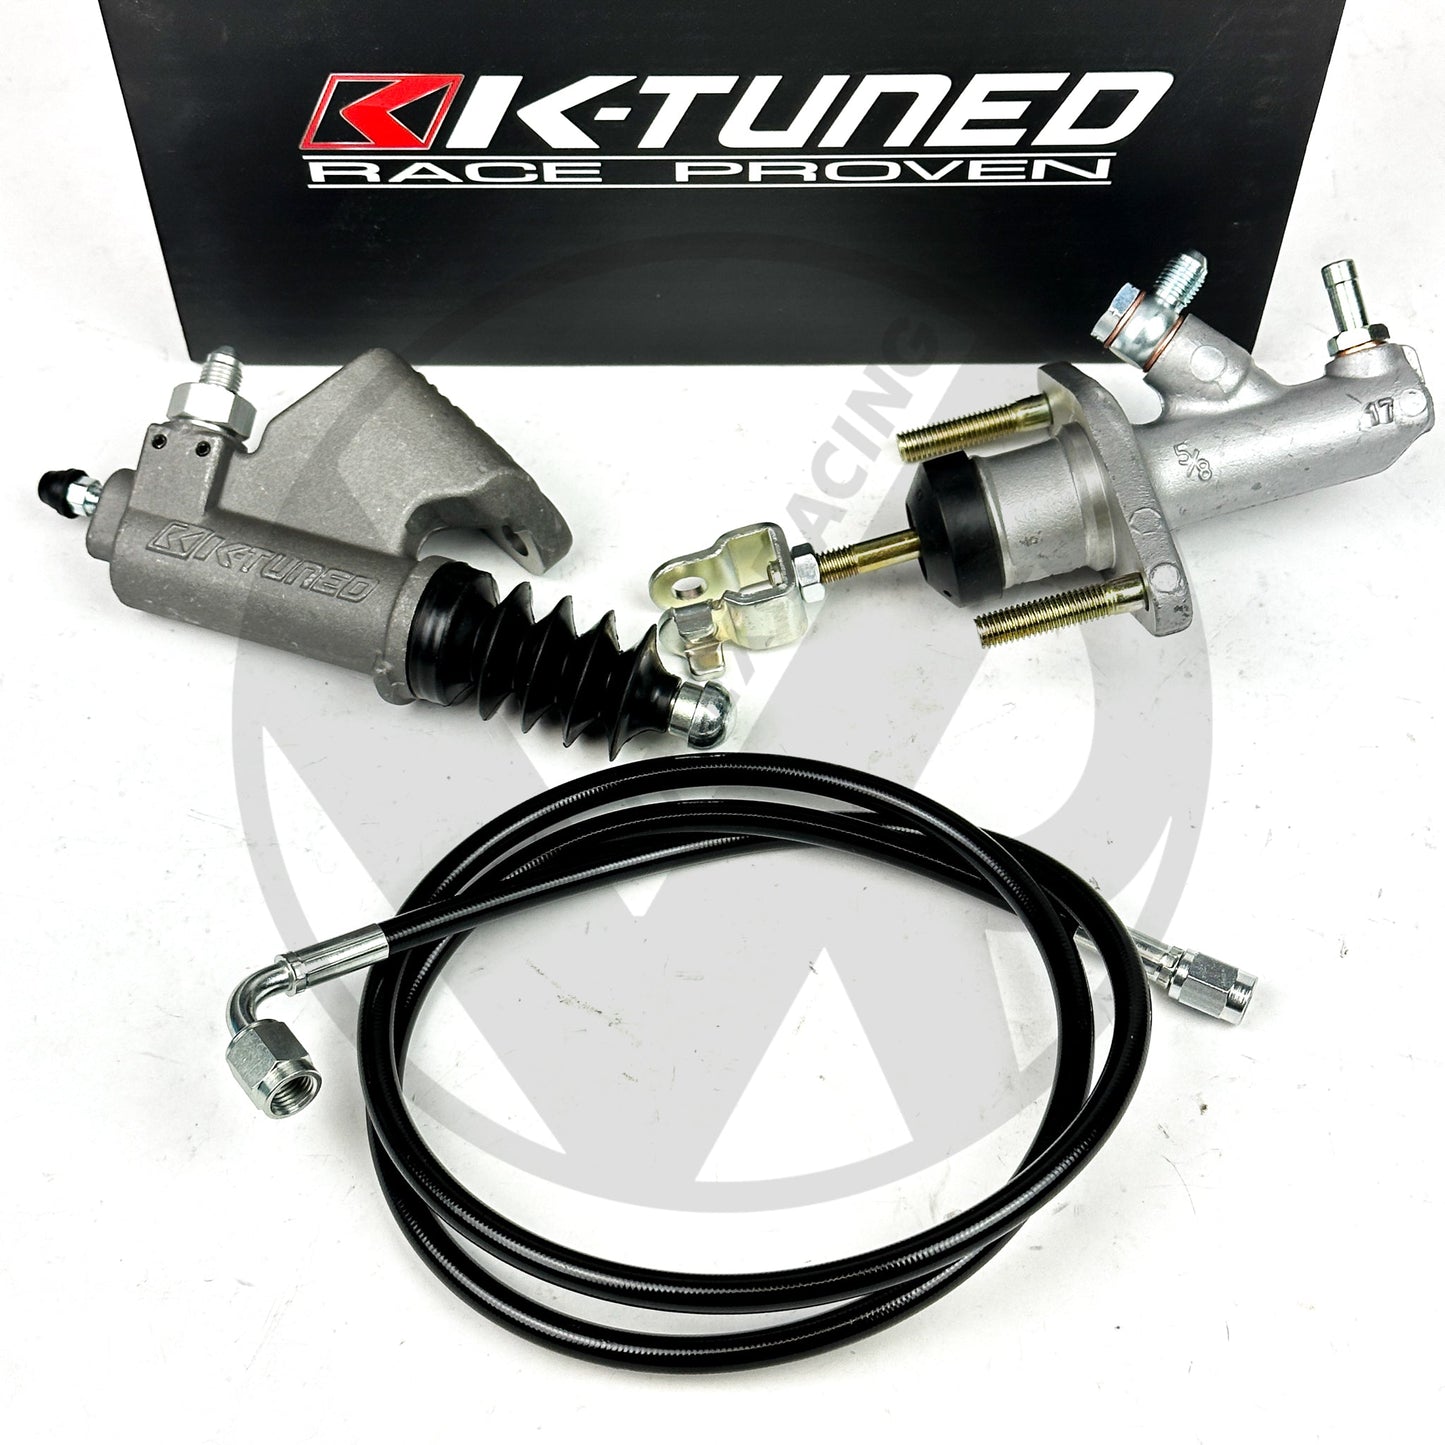 Bolt In EM1 CMC & K-Tuned Slave Kit for 02-05 Honda Civic Ep3 with Stainless Steel Braided Clutch Line